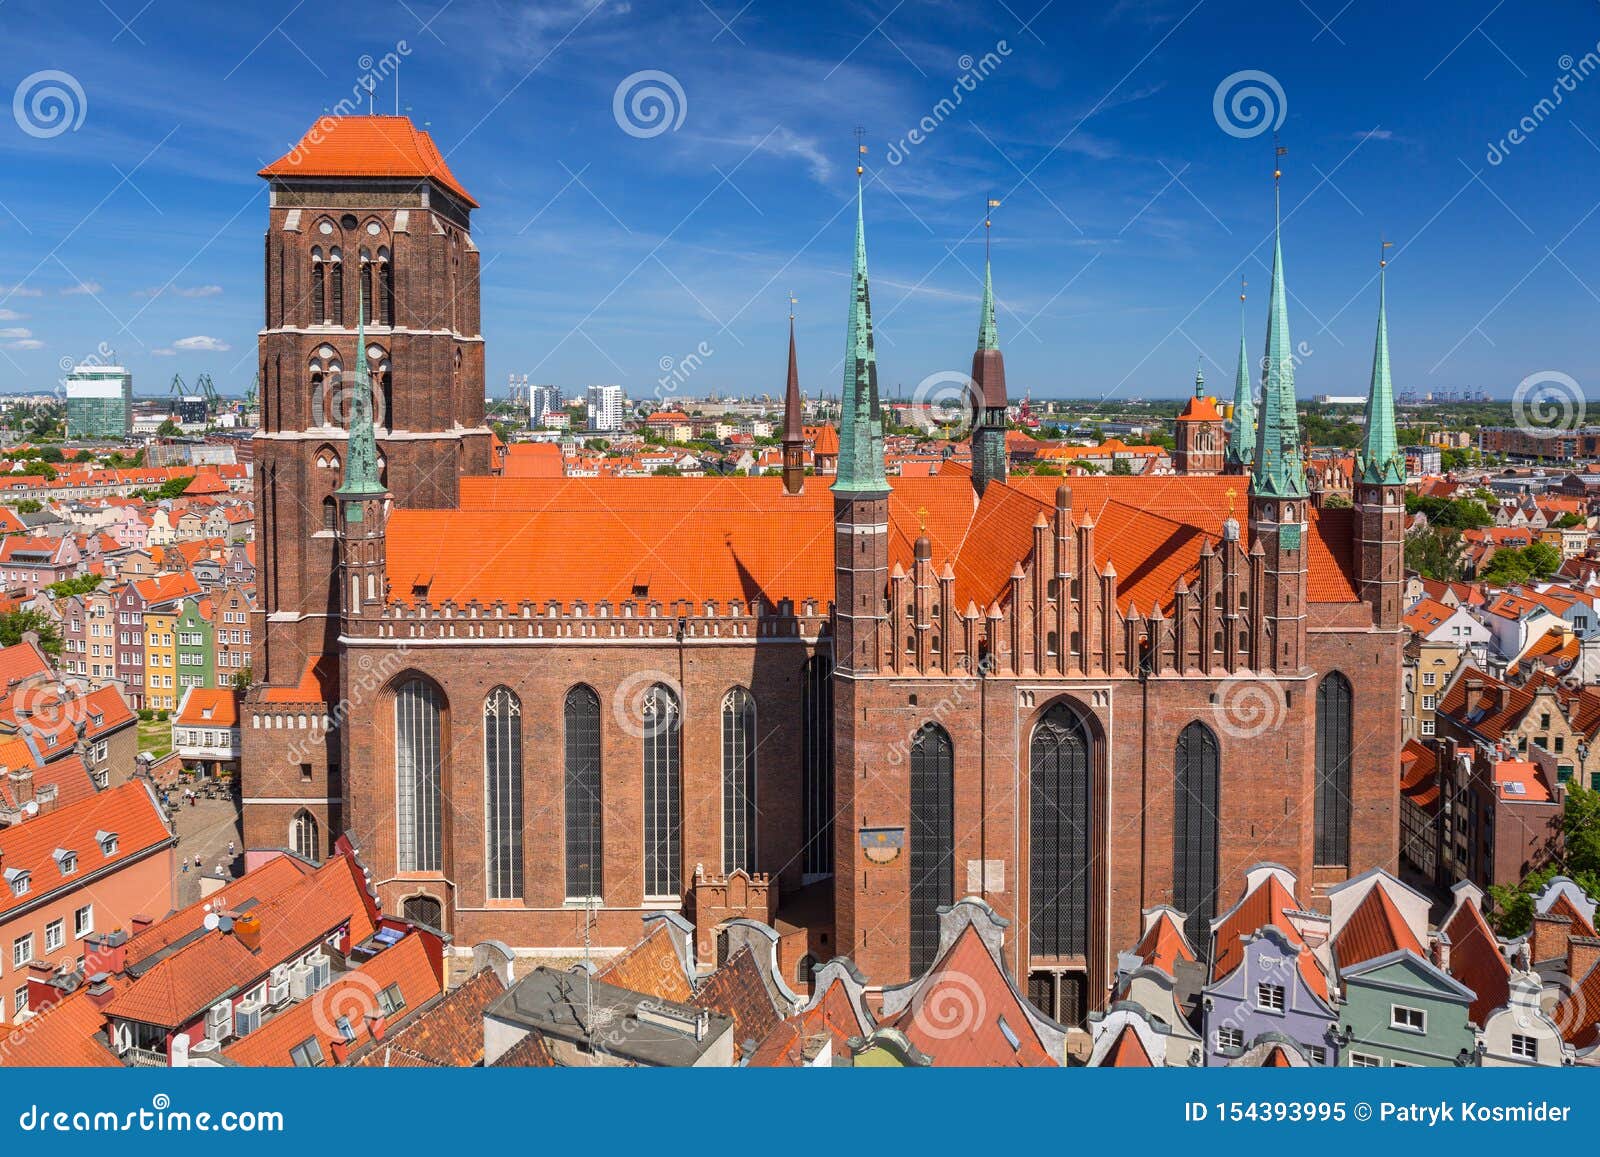 architecture of the st. mary& x27;s basilica in gdansk, poland